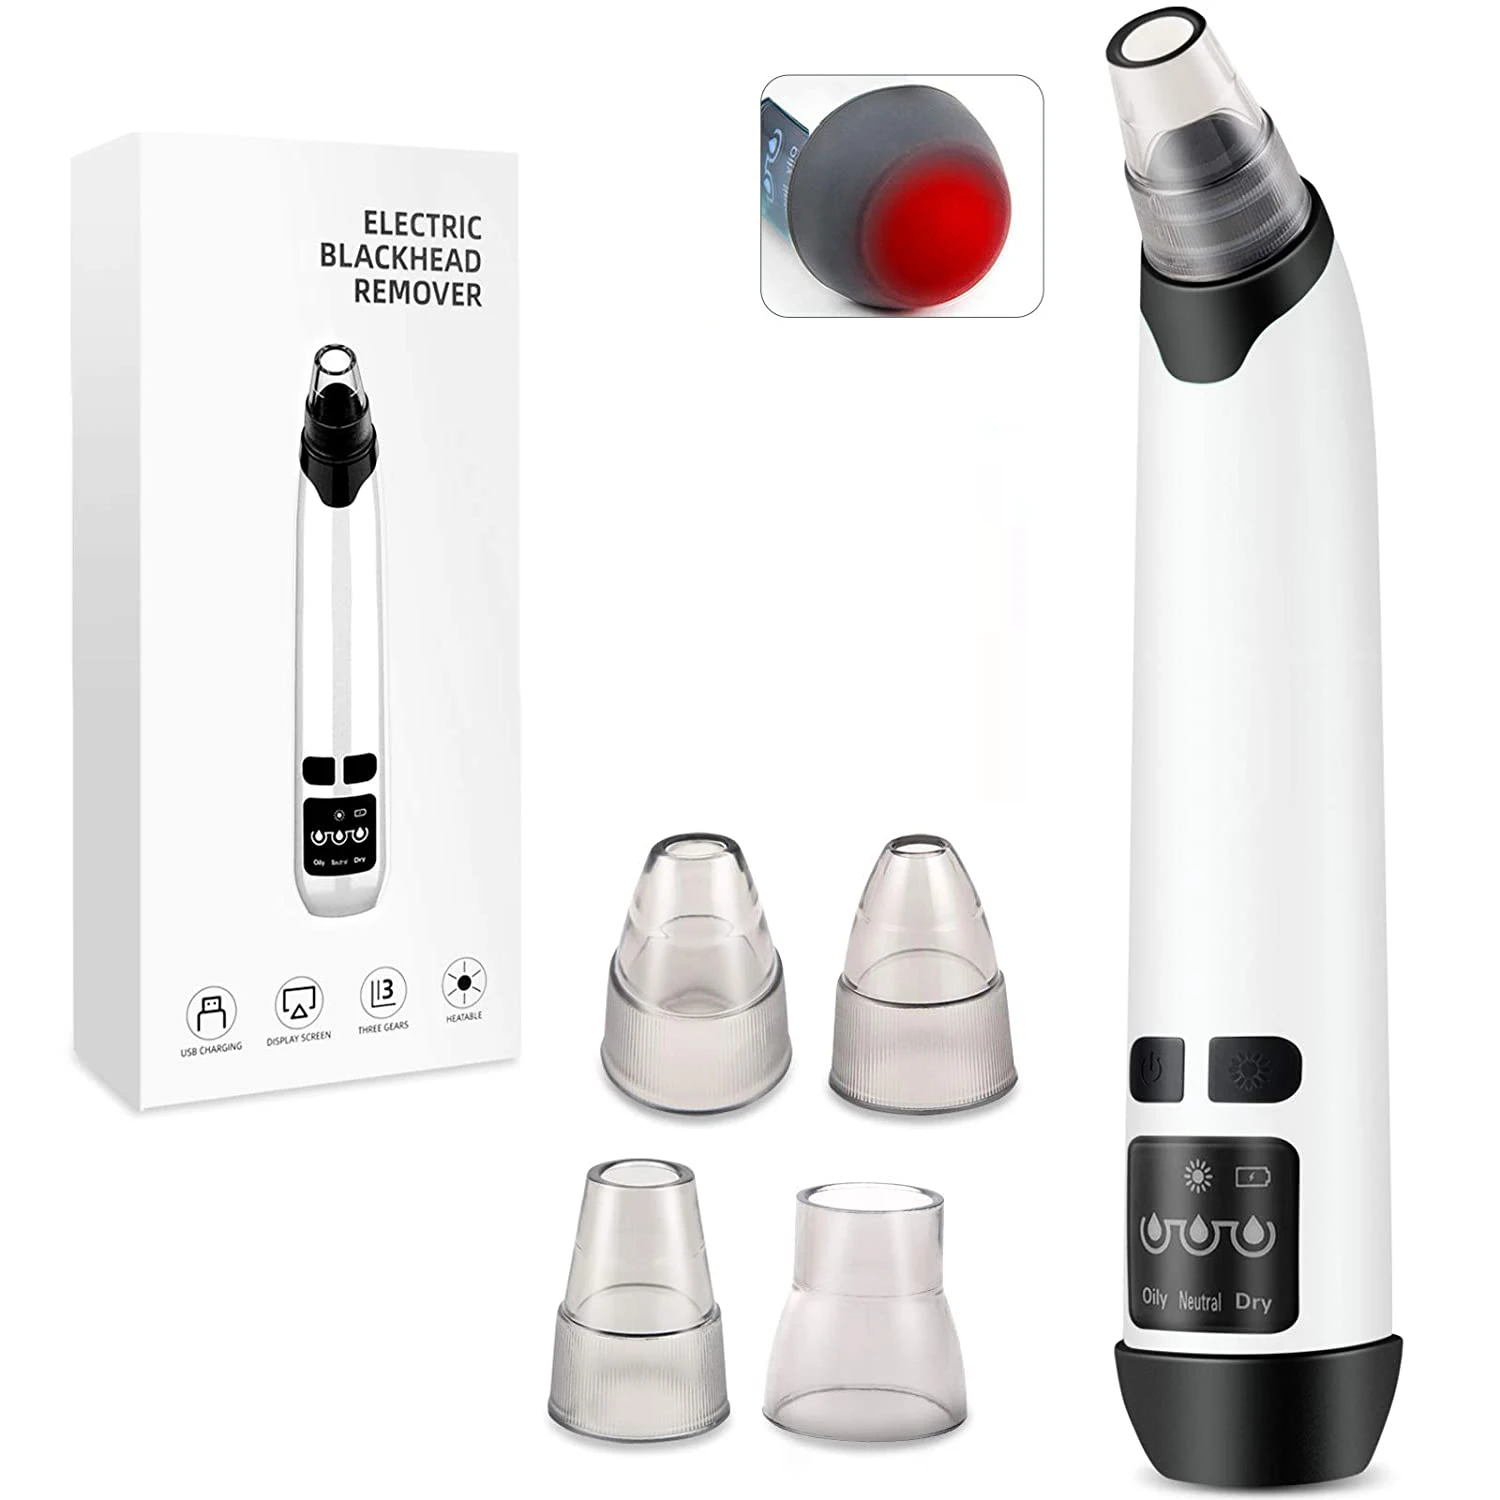 

vacuum cleaner pimples suction blackhead removal remove black point pimples and black head acne for the face